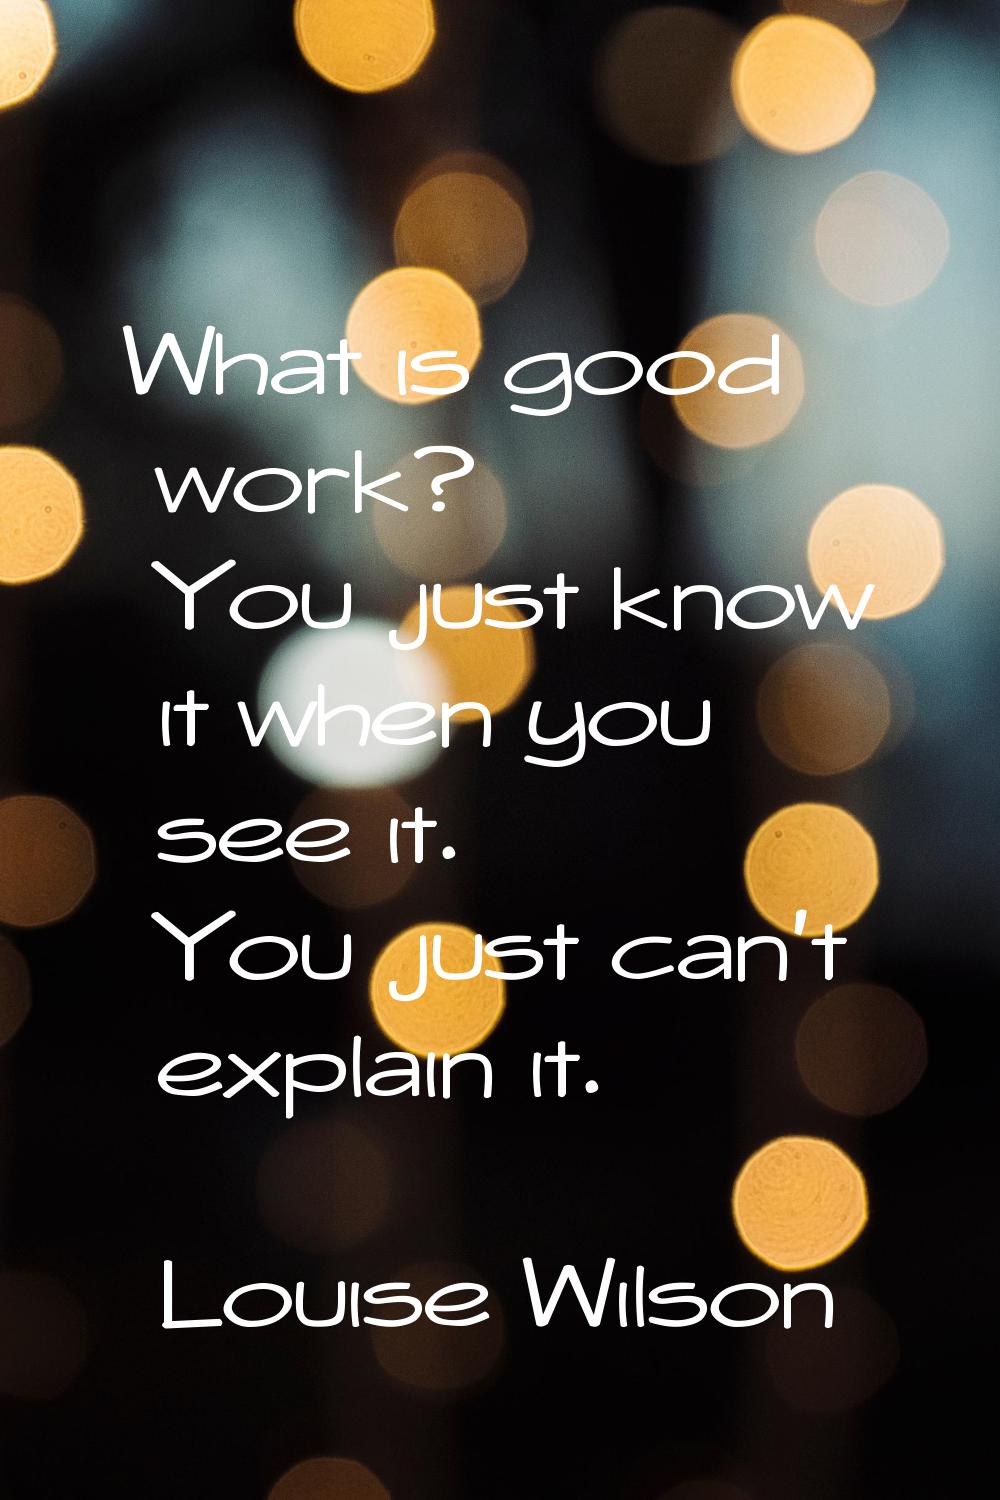 What is good work? You just know it when you see it. You just can't explain it.